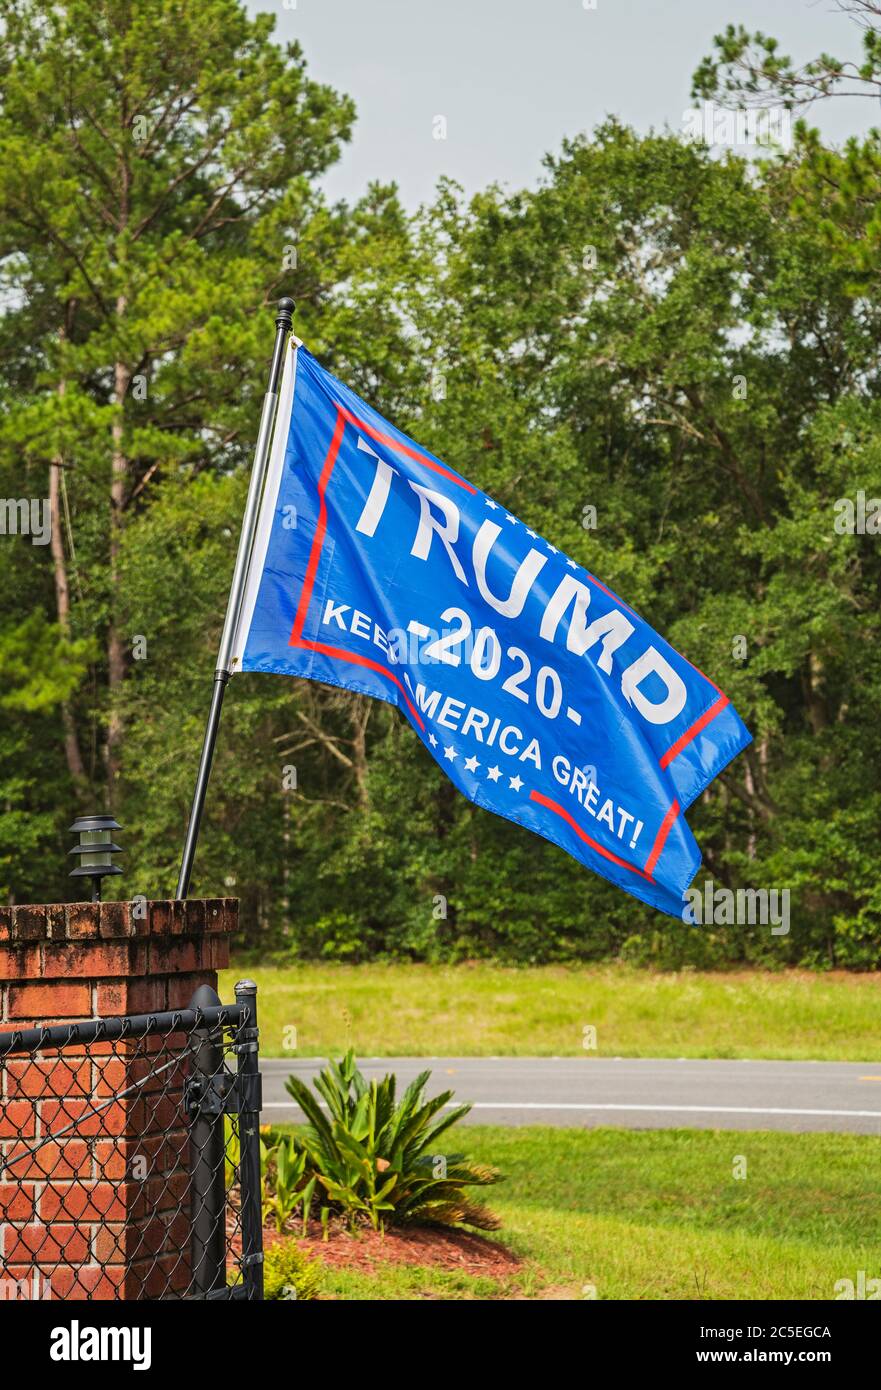 Donald Trump re-election flags & banners on display in rural America. Stock Photo